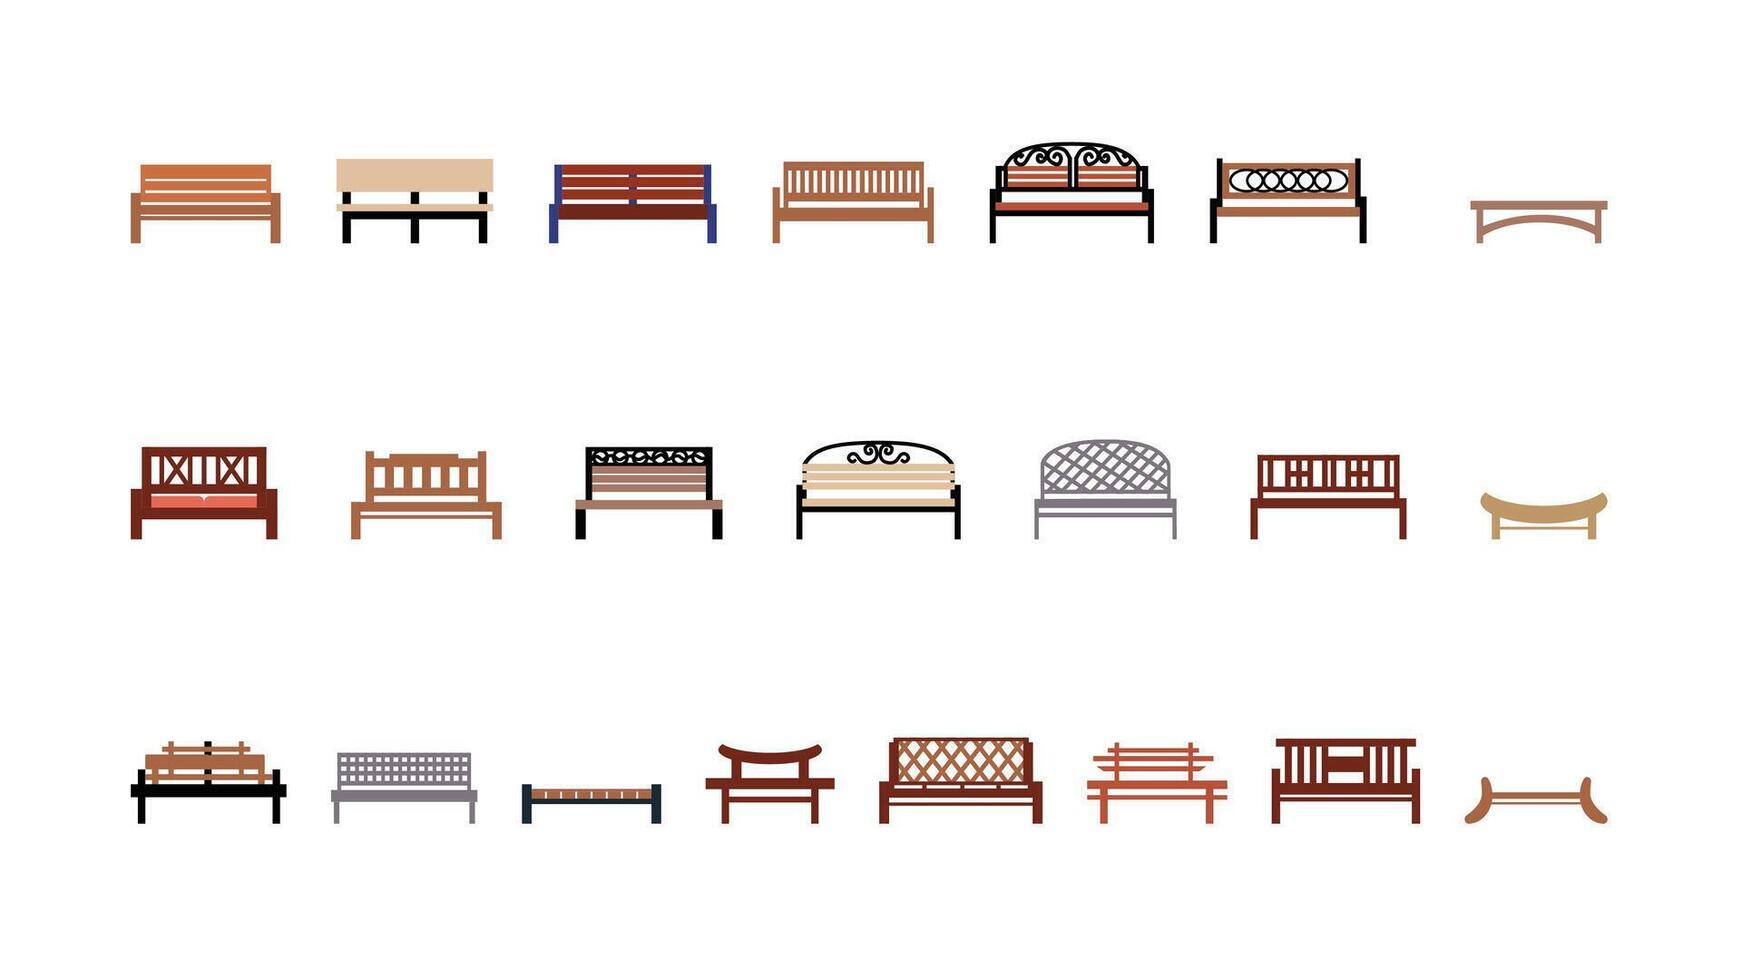 Set of icons of 22 benches in a city park, elements of urban infrastructure, illustrations in a flat style. vector